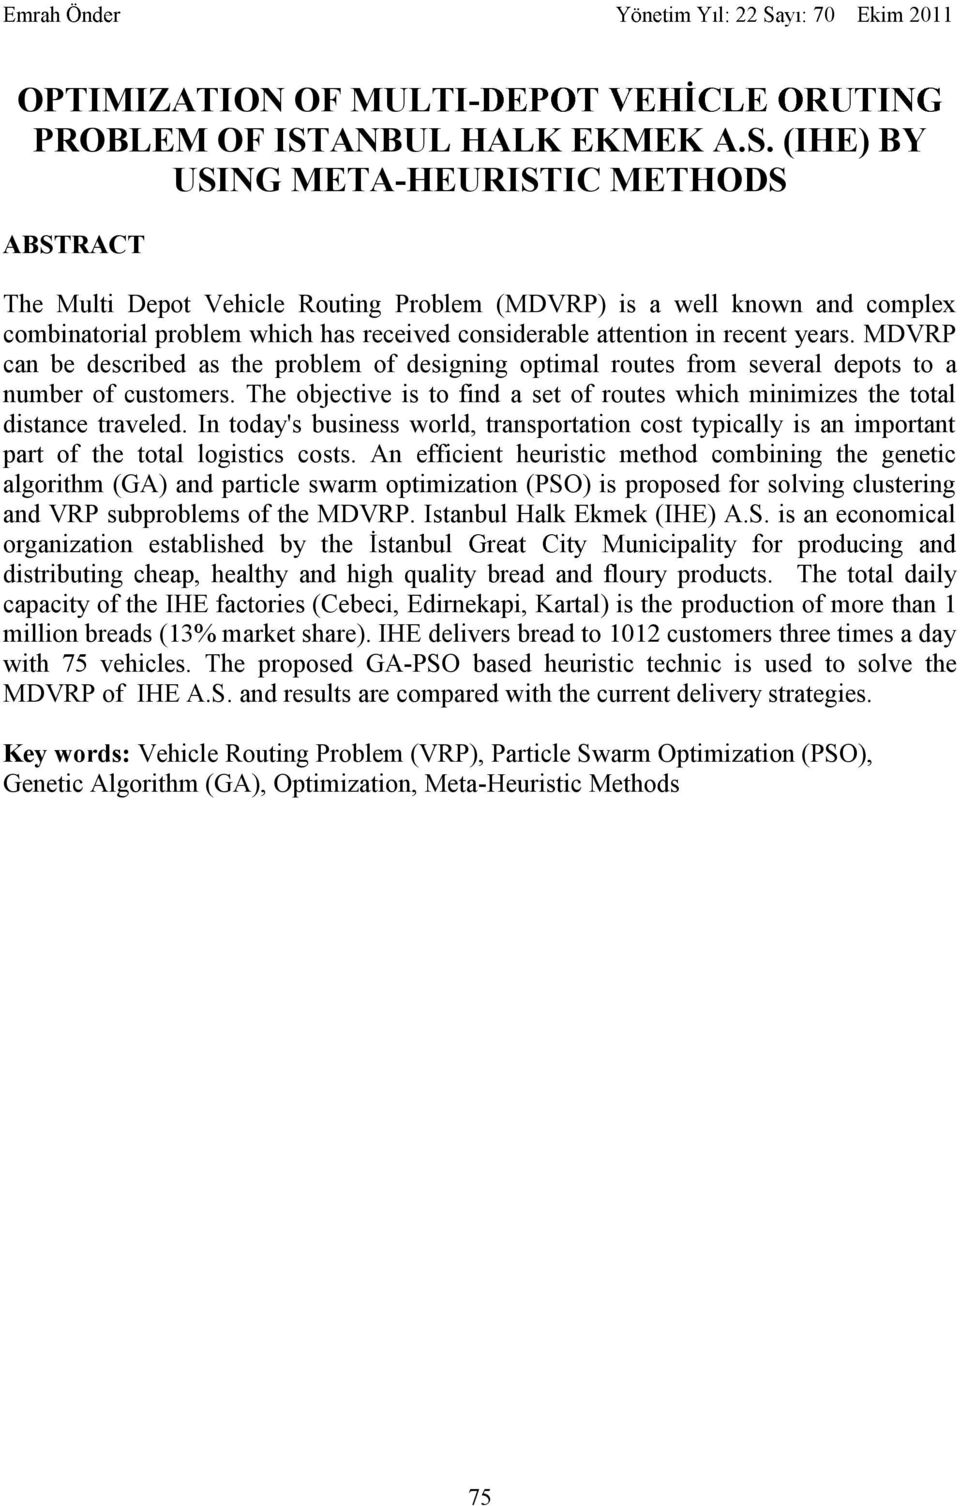 (IHE) BY USING META-HEURISTIC METHODS ABSTRACT The Mult Depot Vehcle Routng Problem (MDVRP) s a well known and complex combnatoral problem whch has receved consderable attenton n recent years.